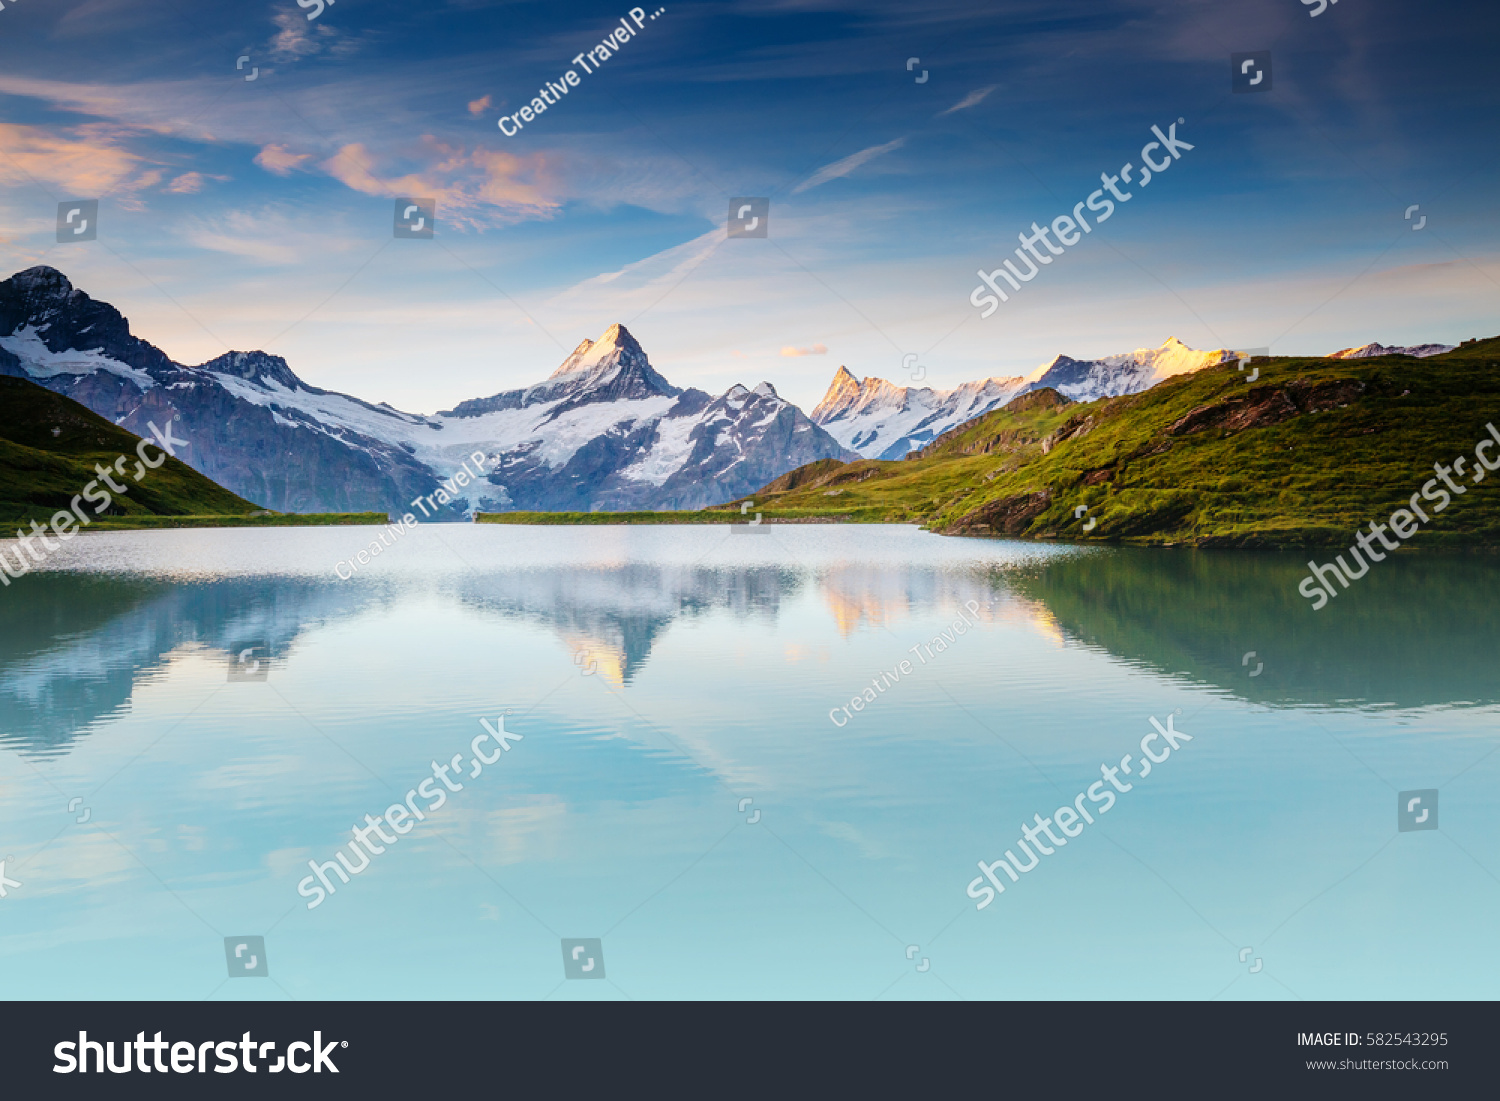 Great view of the snow rocky massif. Popular tourist attraction. Dramatic and picturesque scene. Location place Bachalpsee in Swiss alps, Grindelwald valley, Bernese Oberland, Europe. Beauty world. #582543295